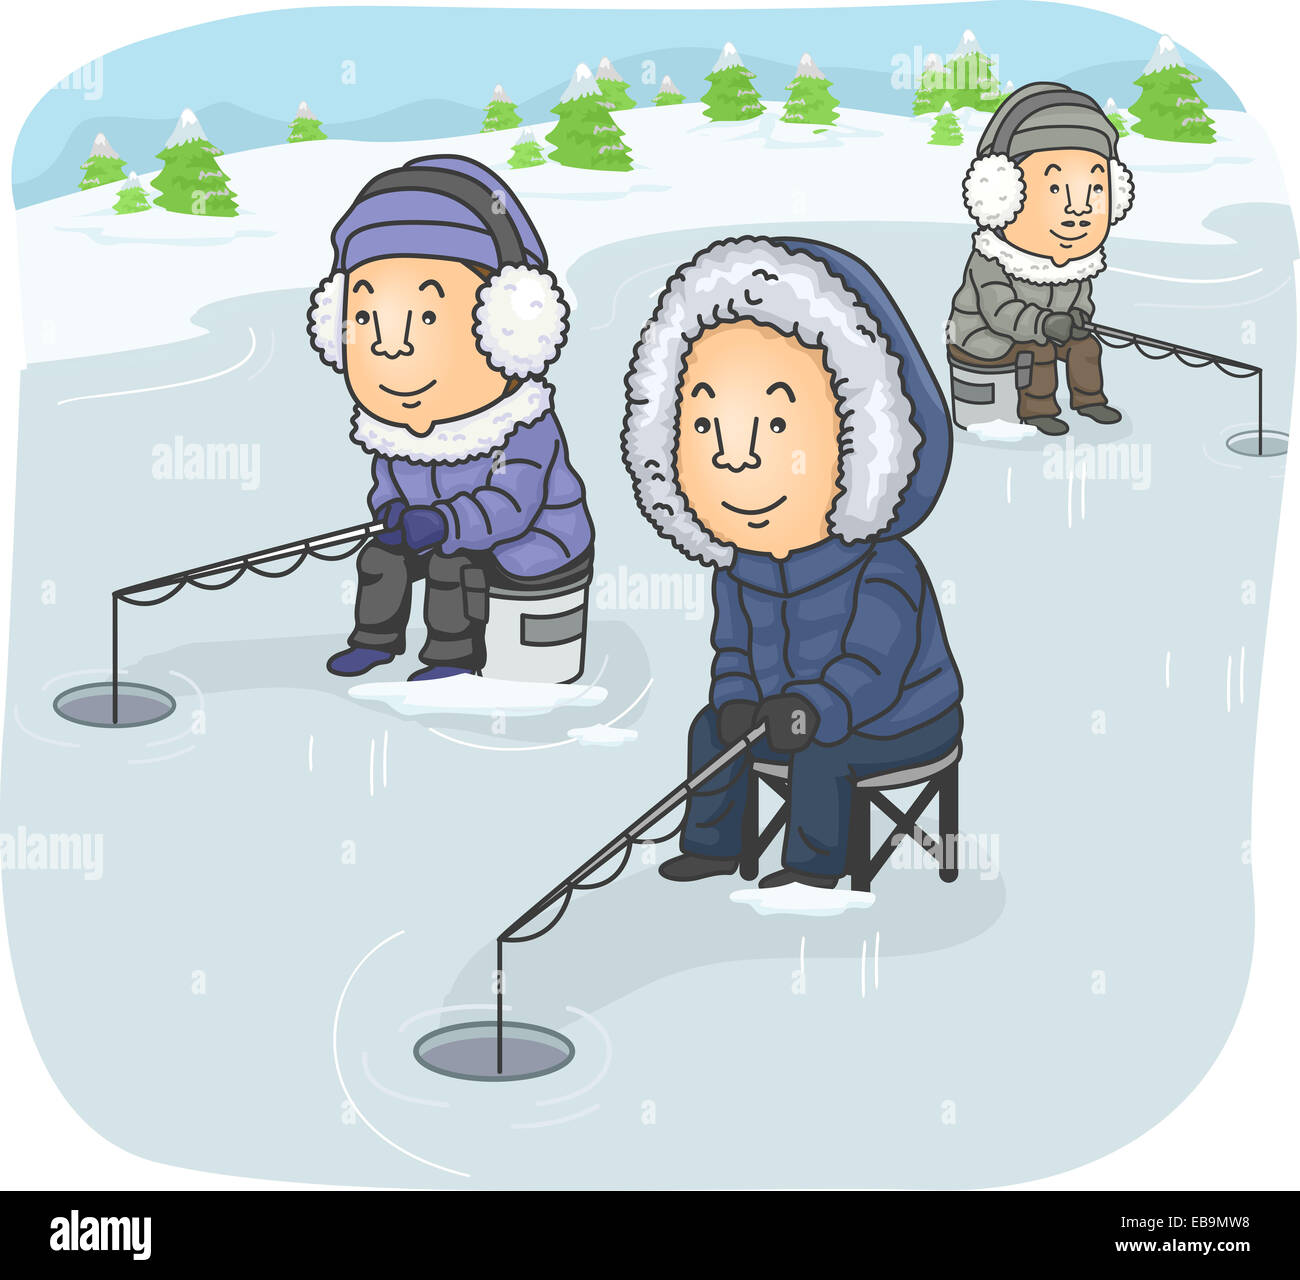 Illustration Featuring a Group of Men Ice Fishing Stock Photo - Alamy